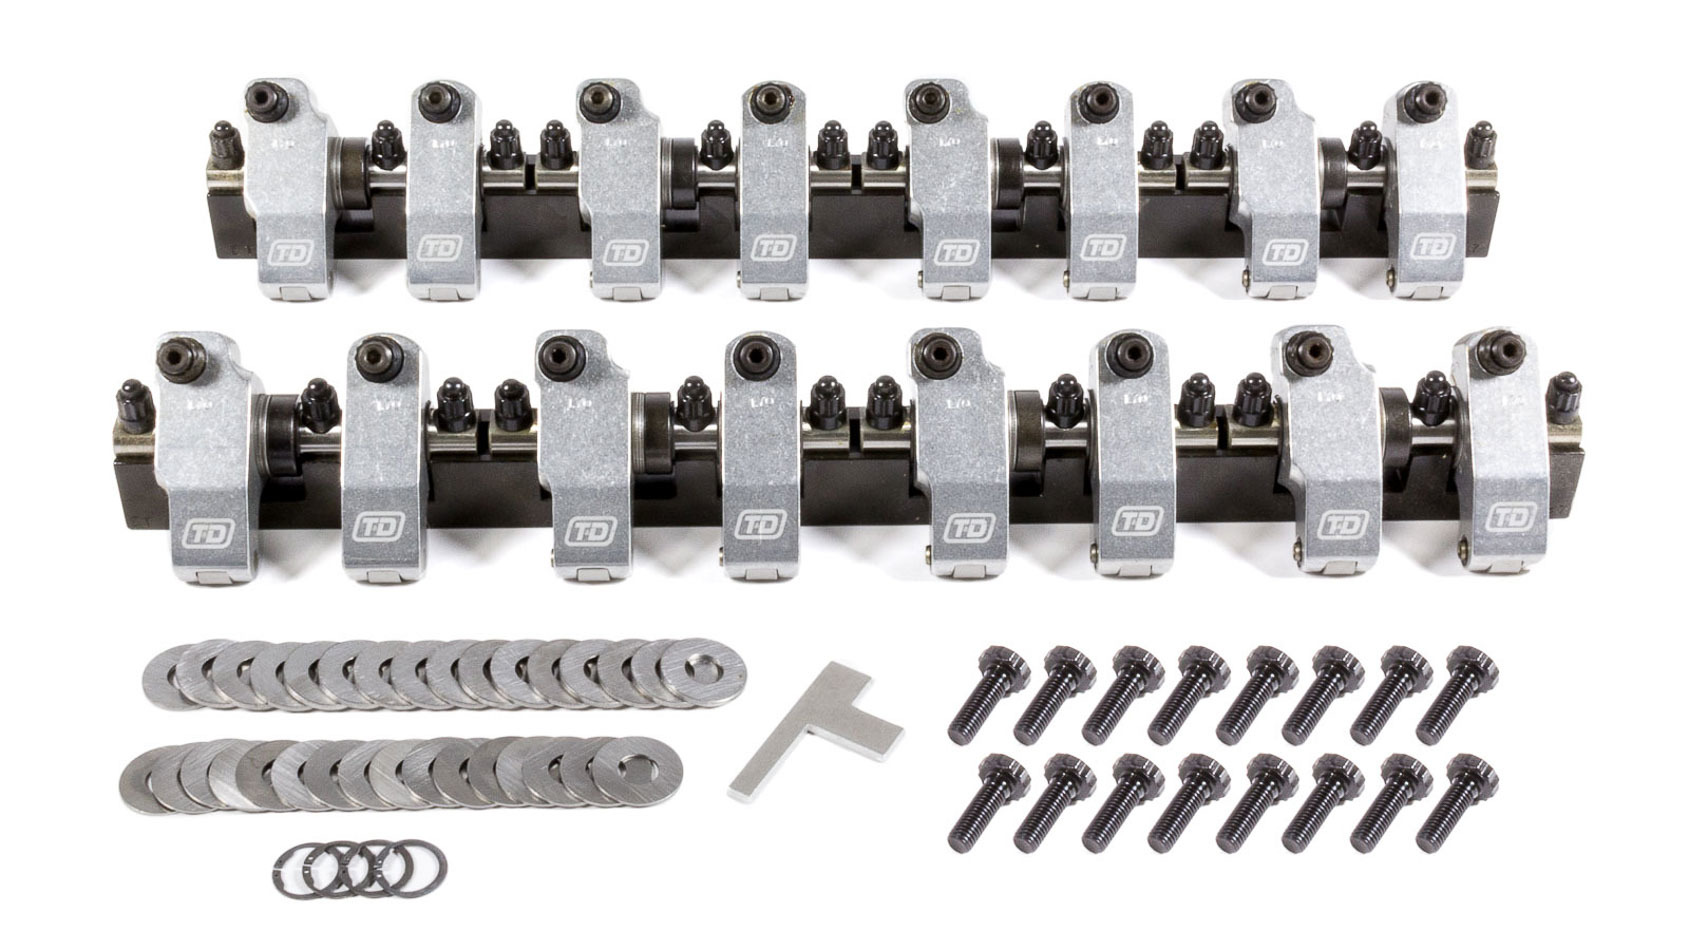 T&D Machine Products 3102-170/170 Shaft Rocker Arm Kit for Big Block Chevy 